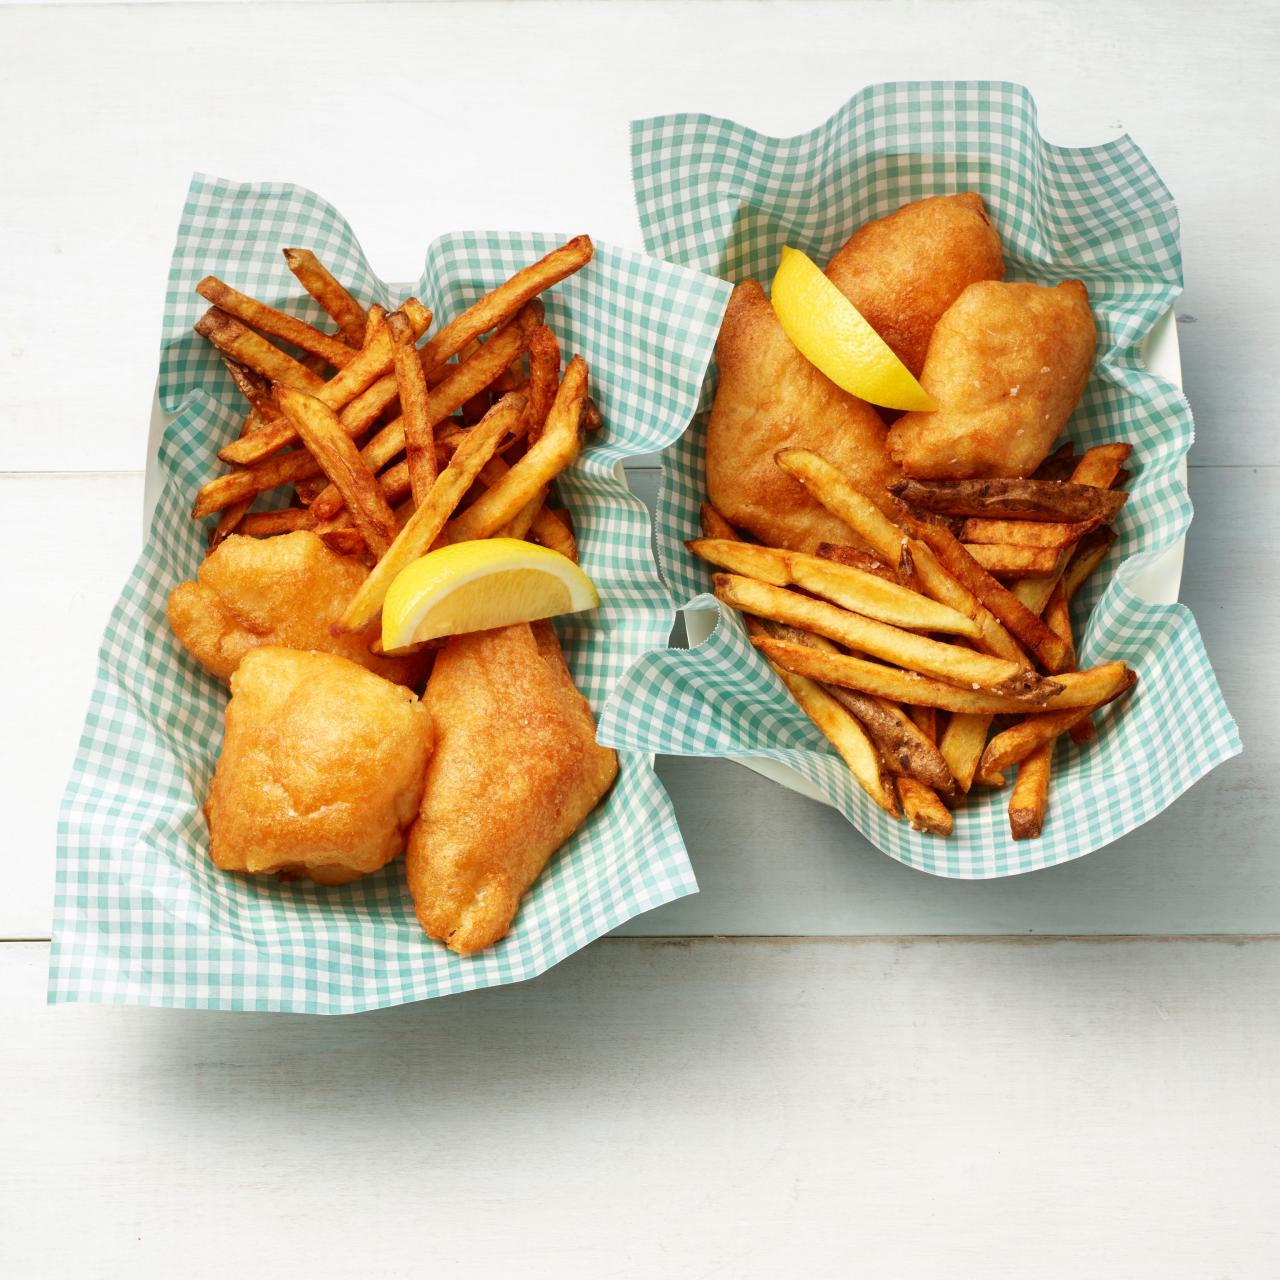 Best Beer-Battered Fish and Chips Recipe - How To Make Fried Fish and Chips